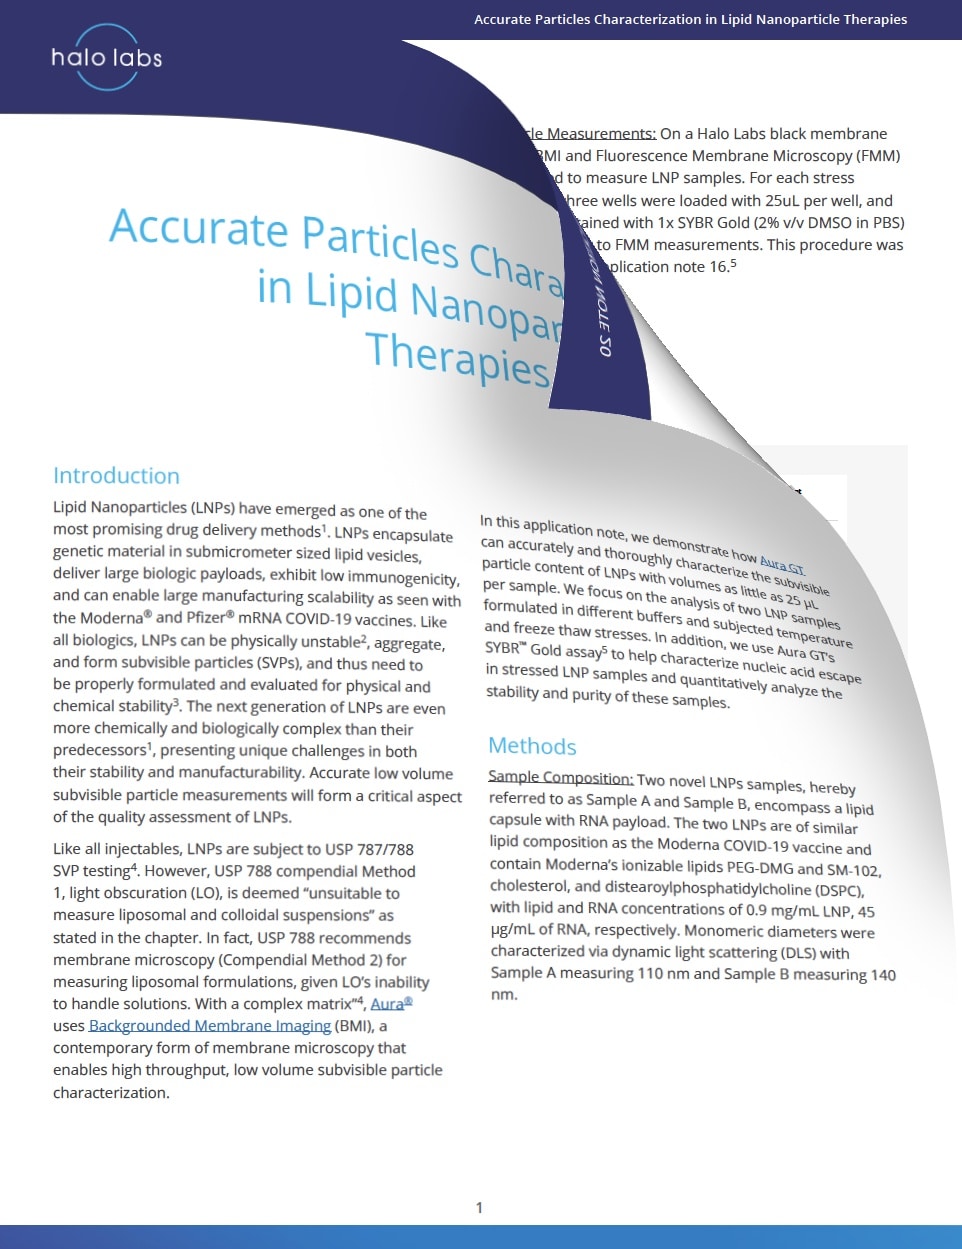 App Note 20: Accurate Particles Characterization in Lipid Nanoparticle Therapies